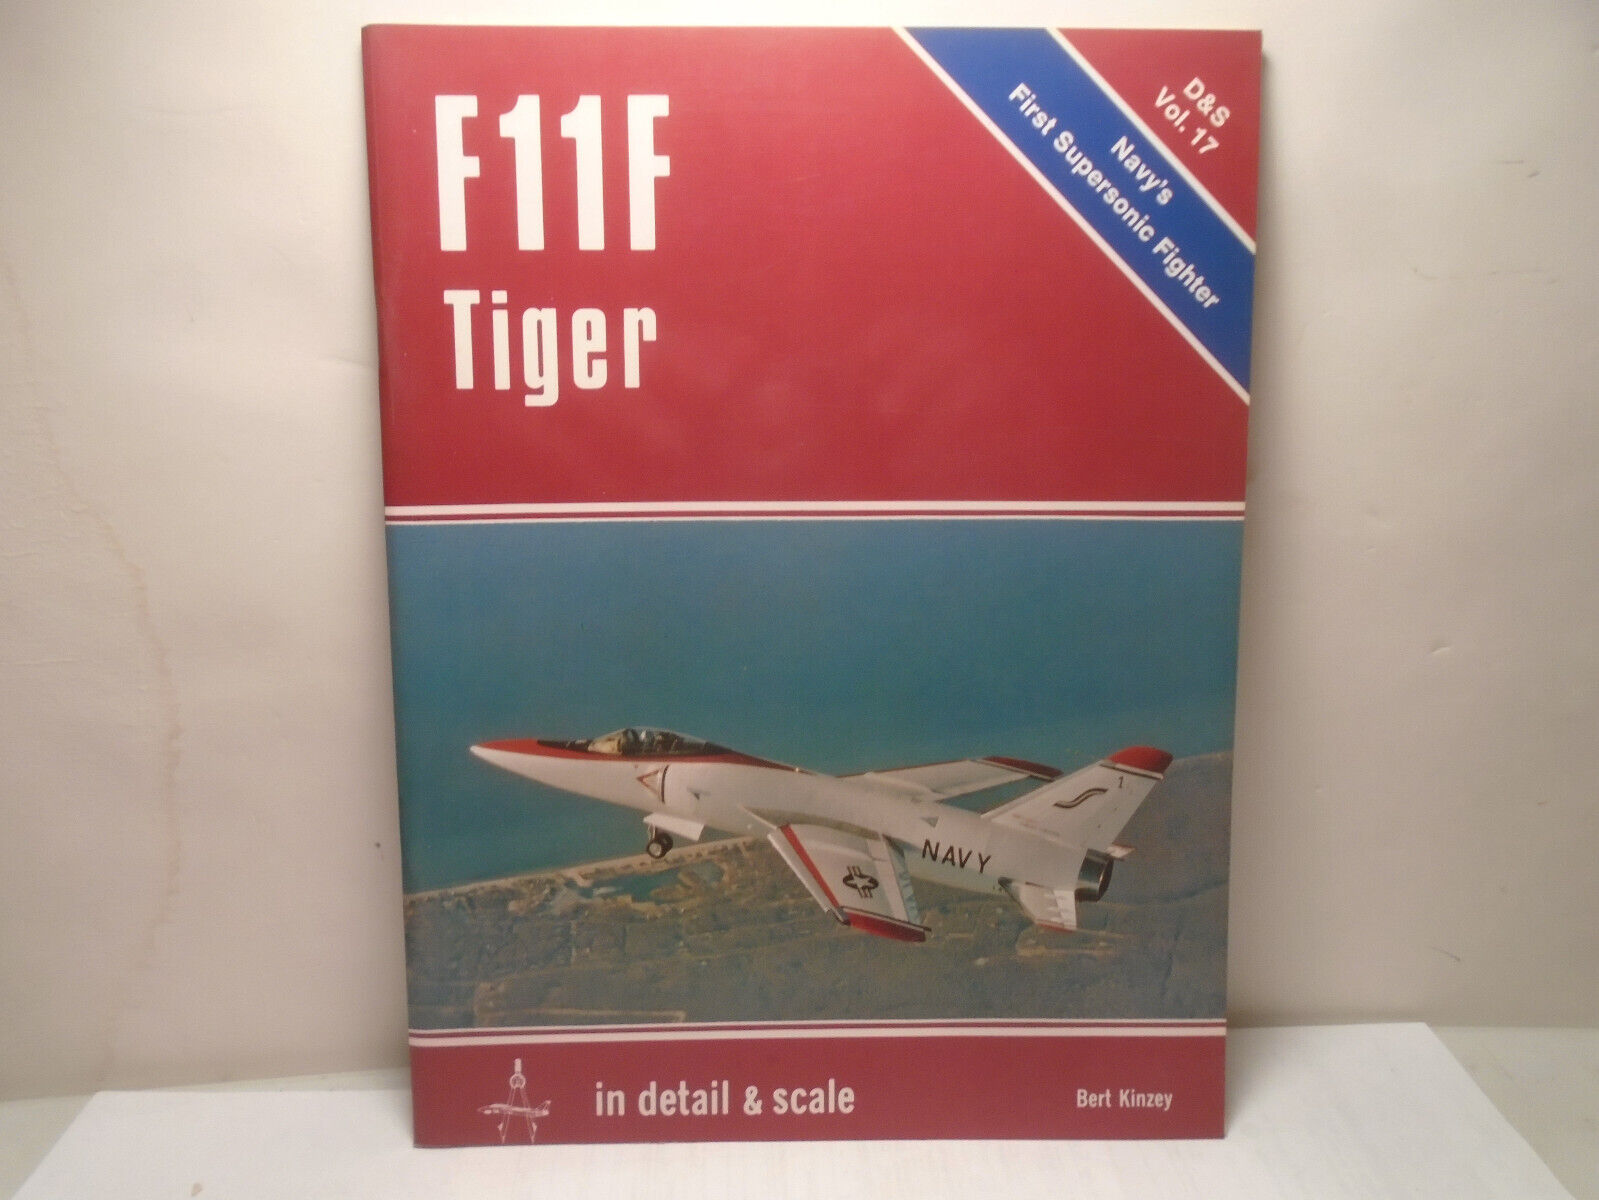 F11F TIGER IN DETAIL & SCALE VOL. 17 BY BERT KINZEY NAVY\'S 1ST SUPERSONIC FIGHTE